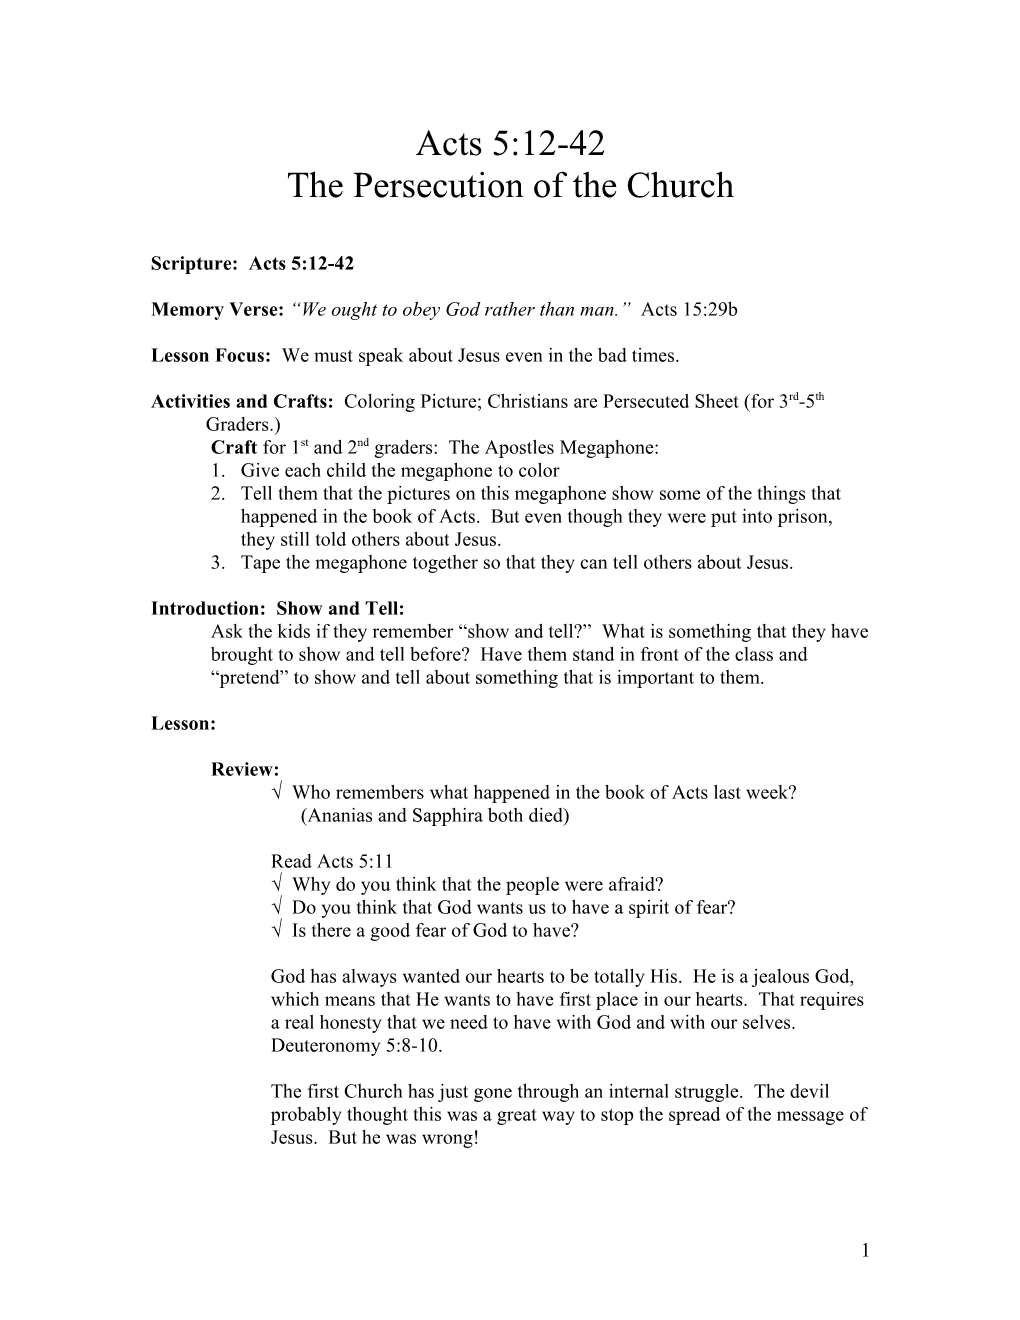 The Persecution of the Church